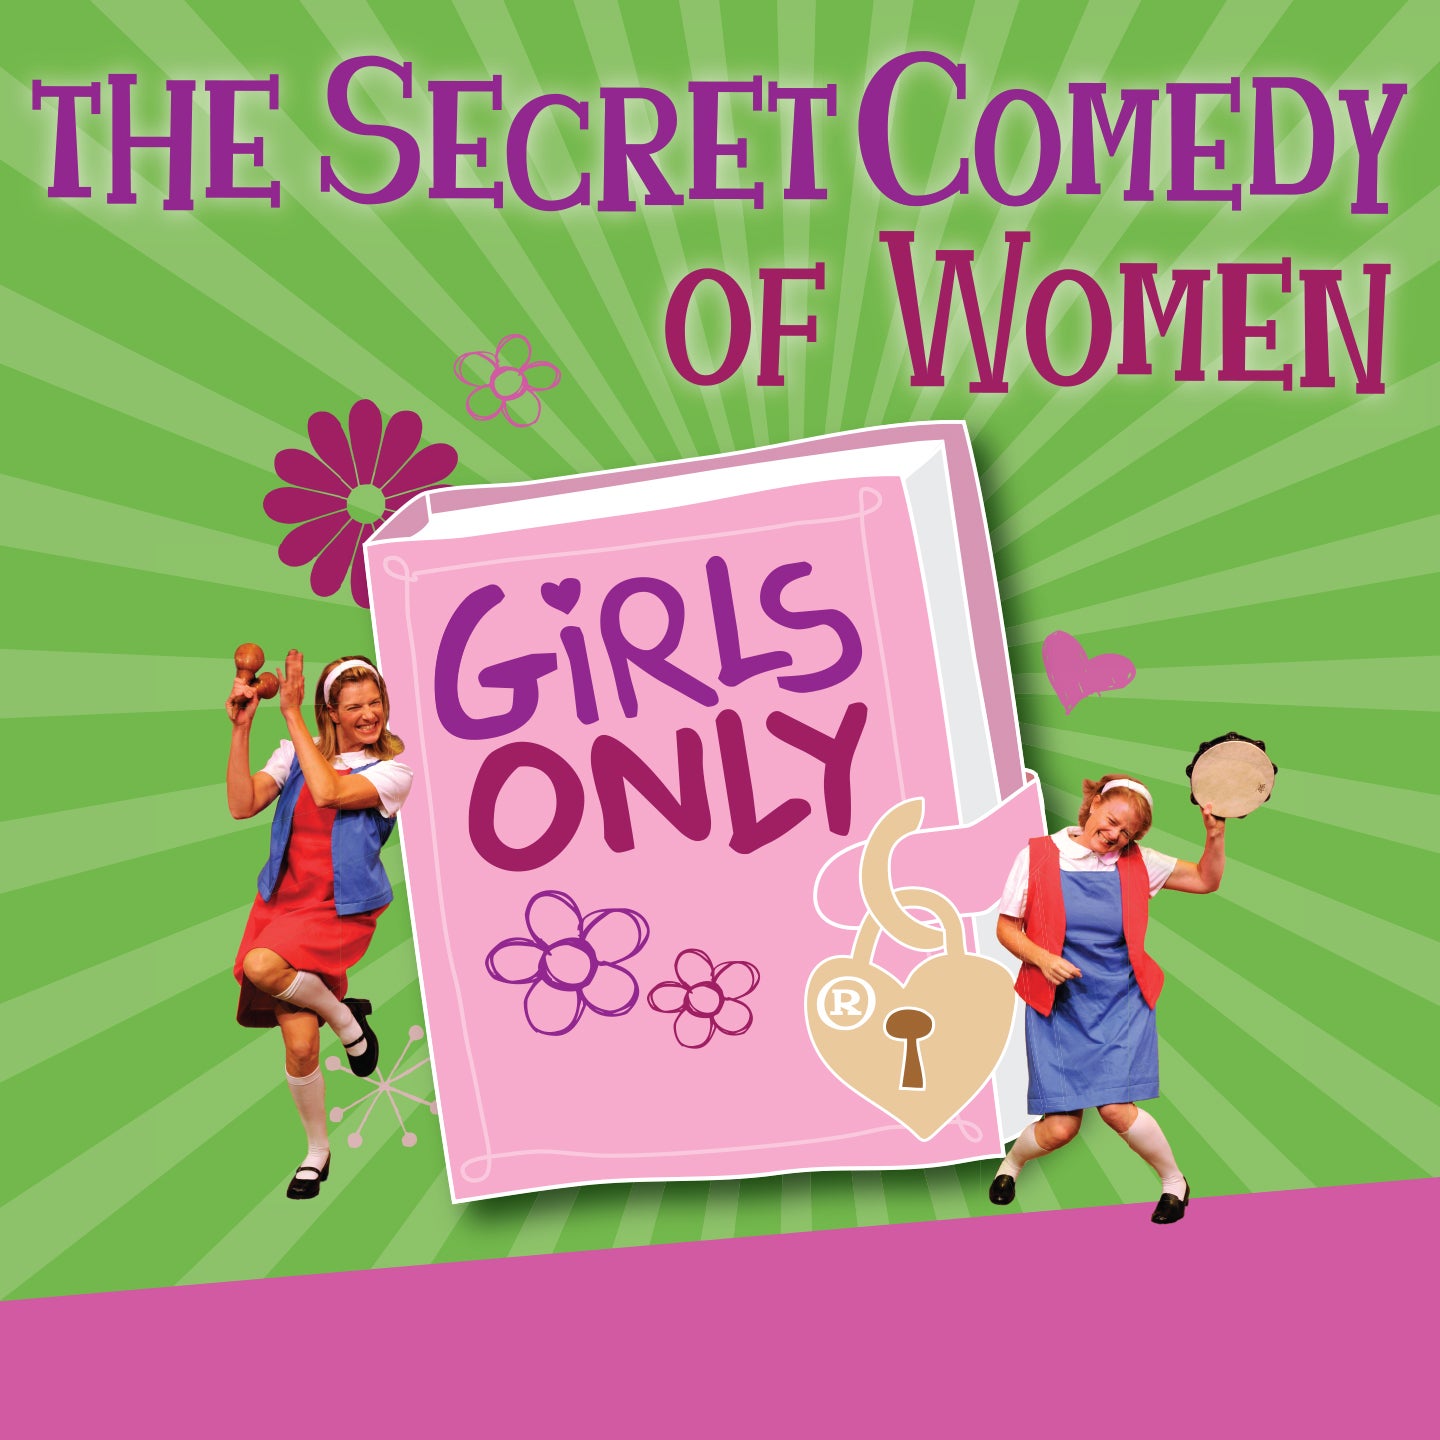 The Secret Comedy of Women: Girls Only